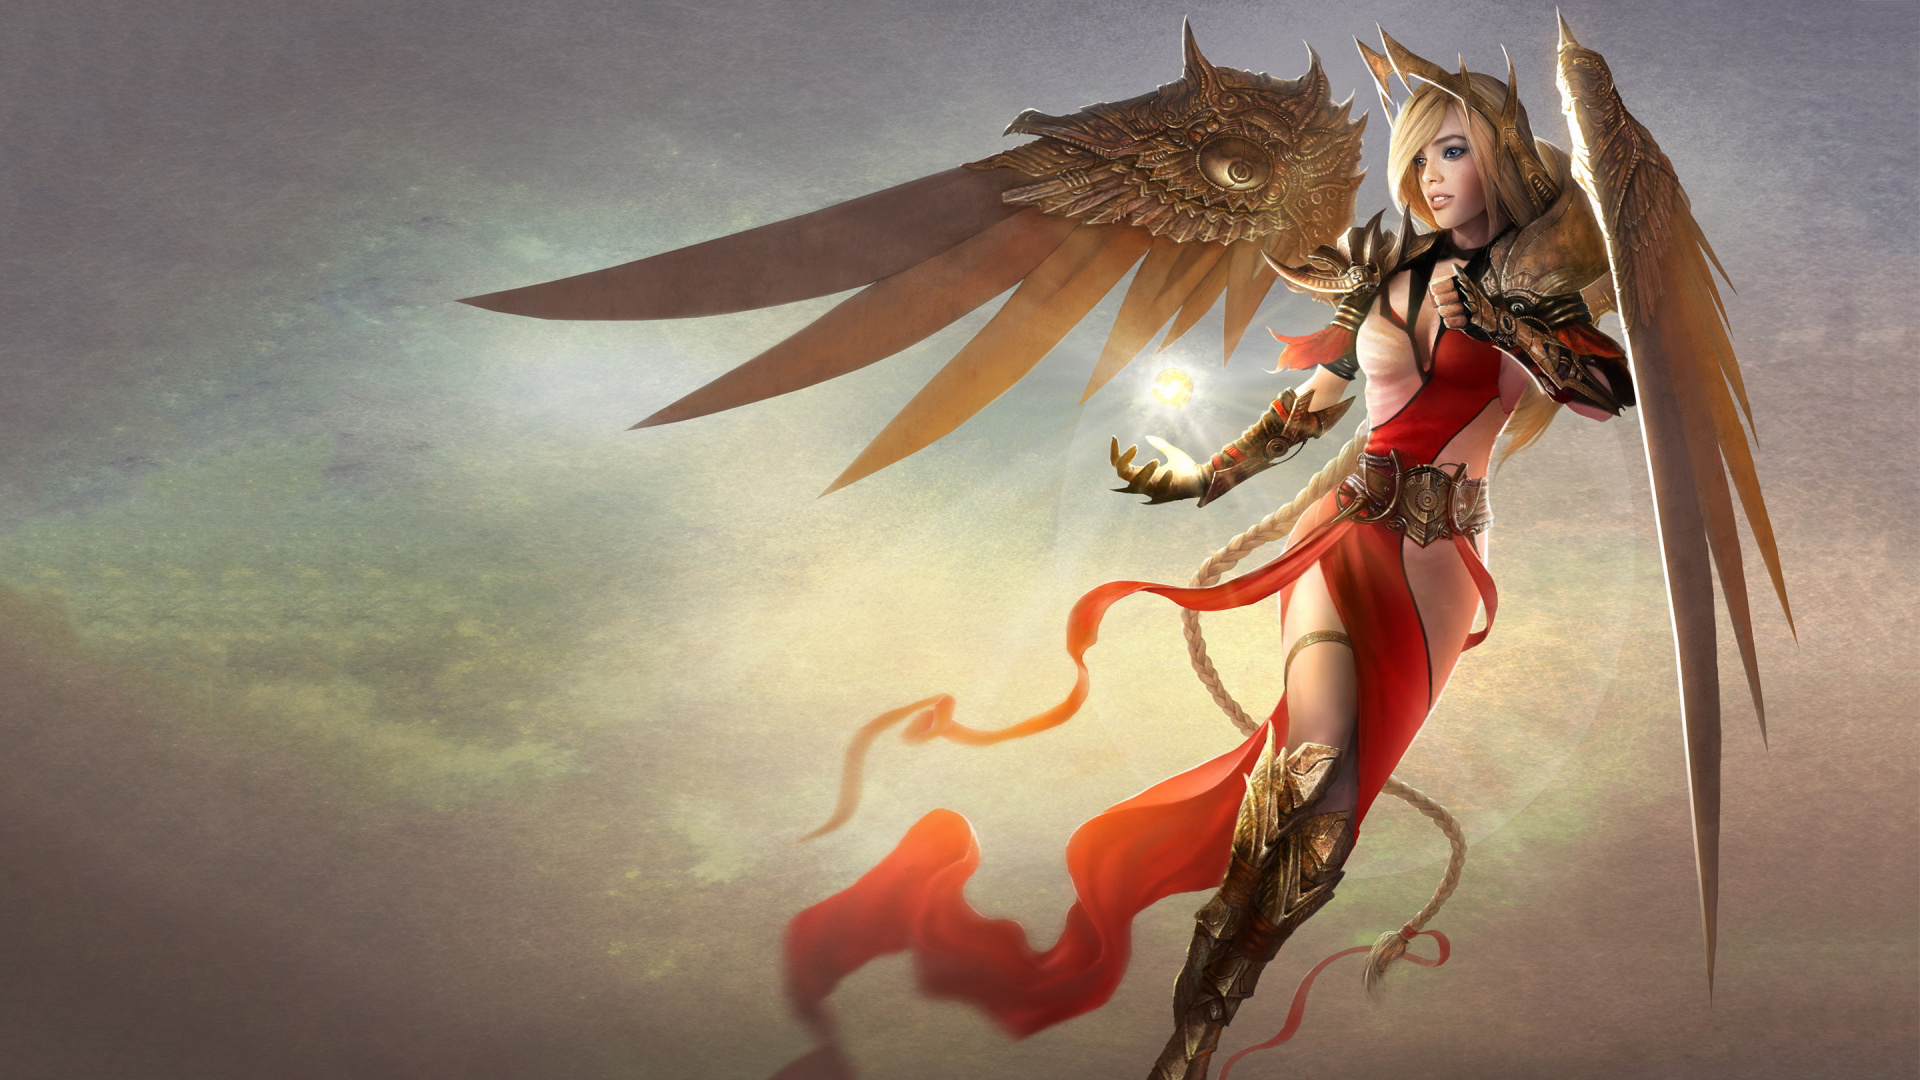 Woman in Red Dress Holding a Sword Illustration. Wallpaper in 1920x1080 Resolution